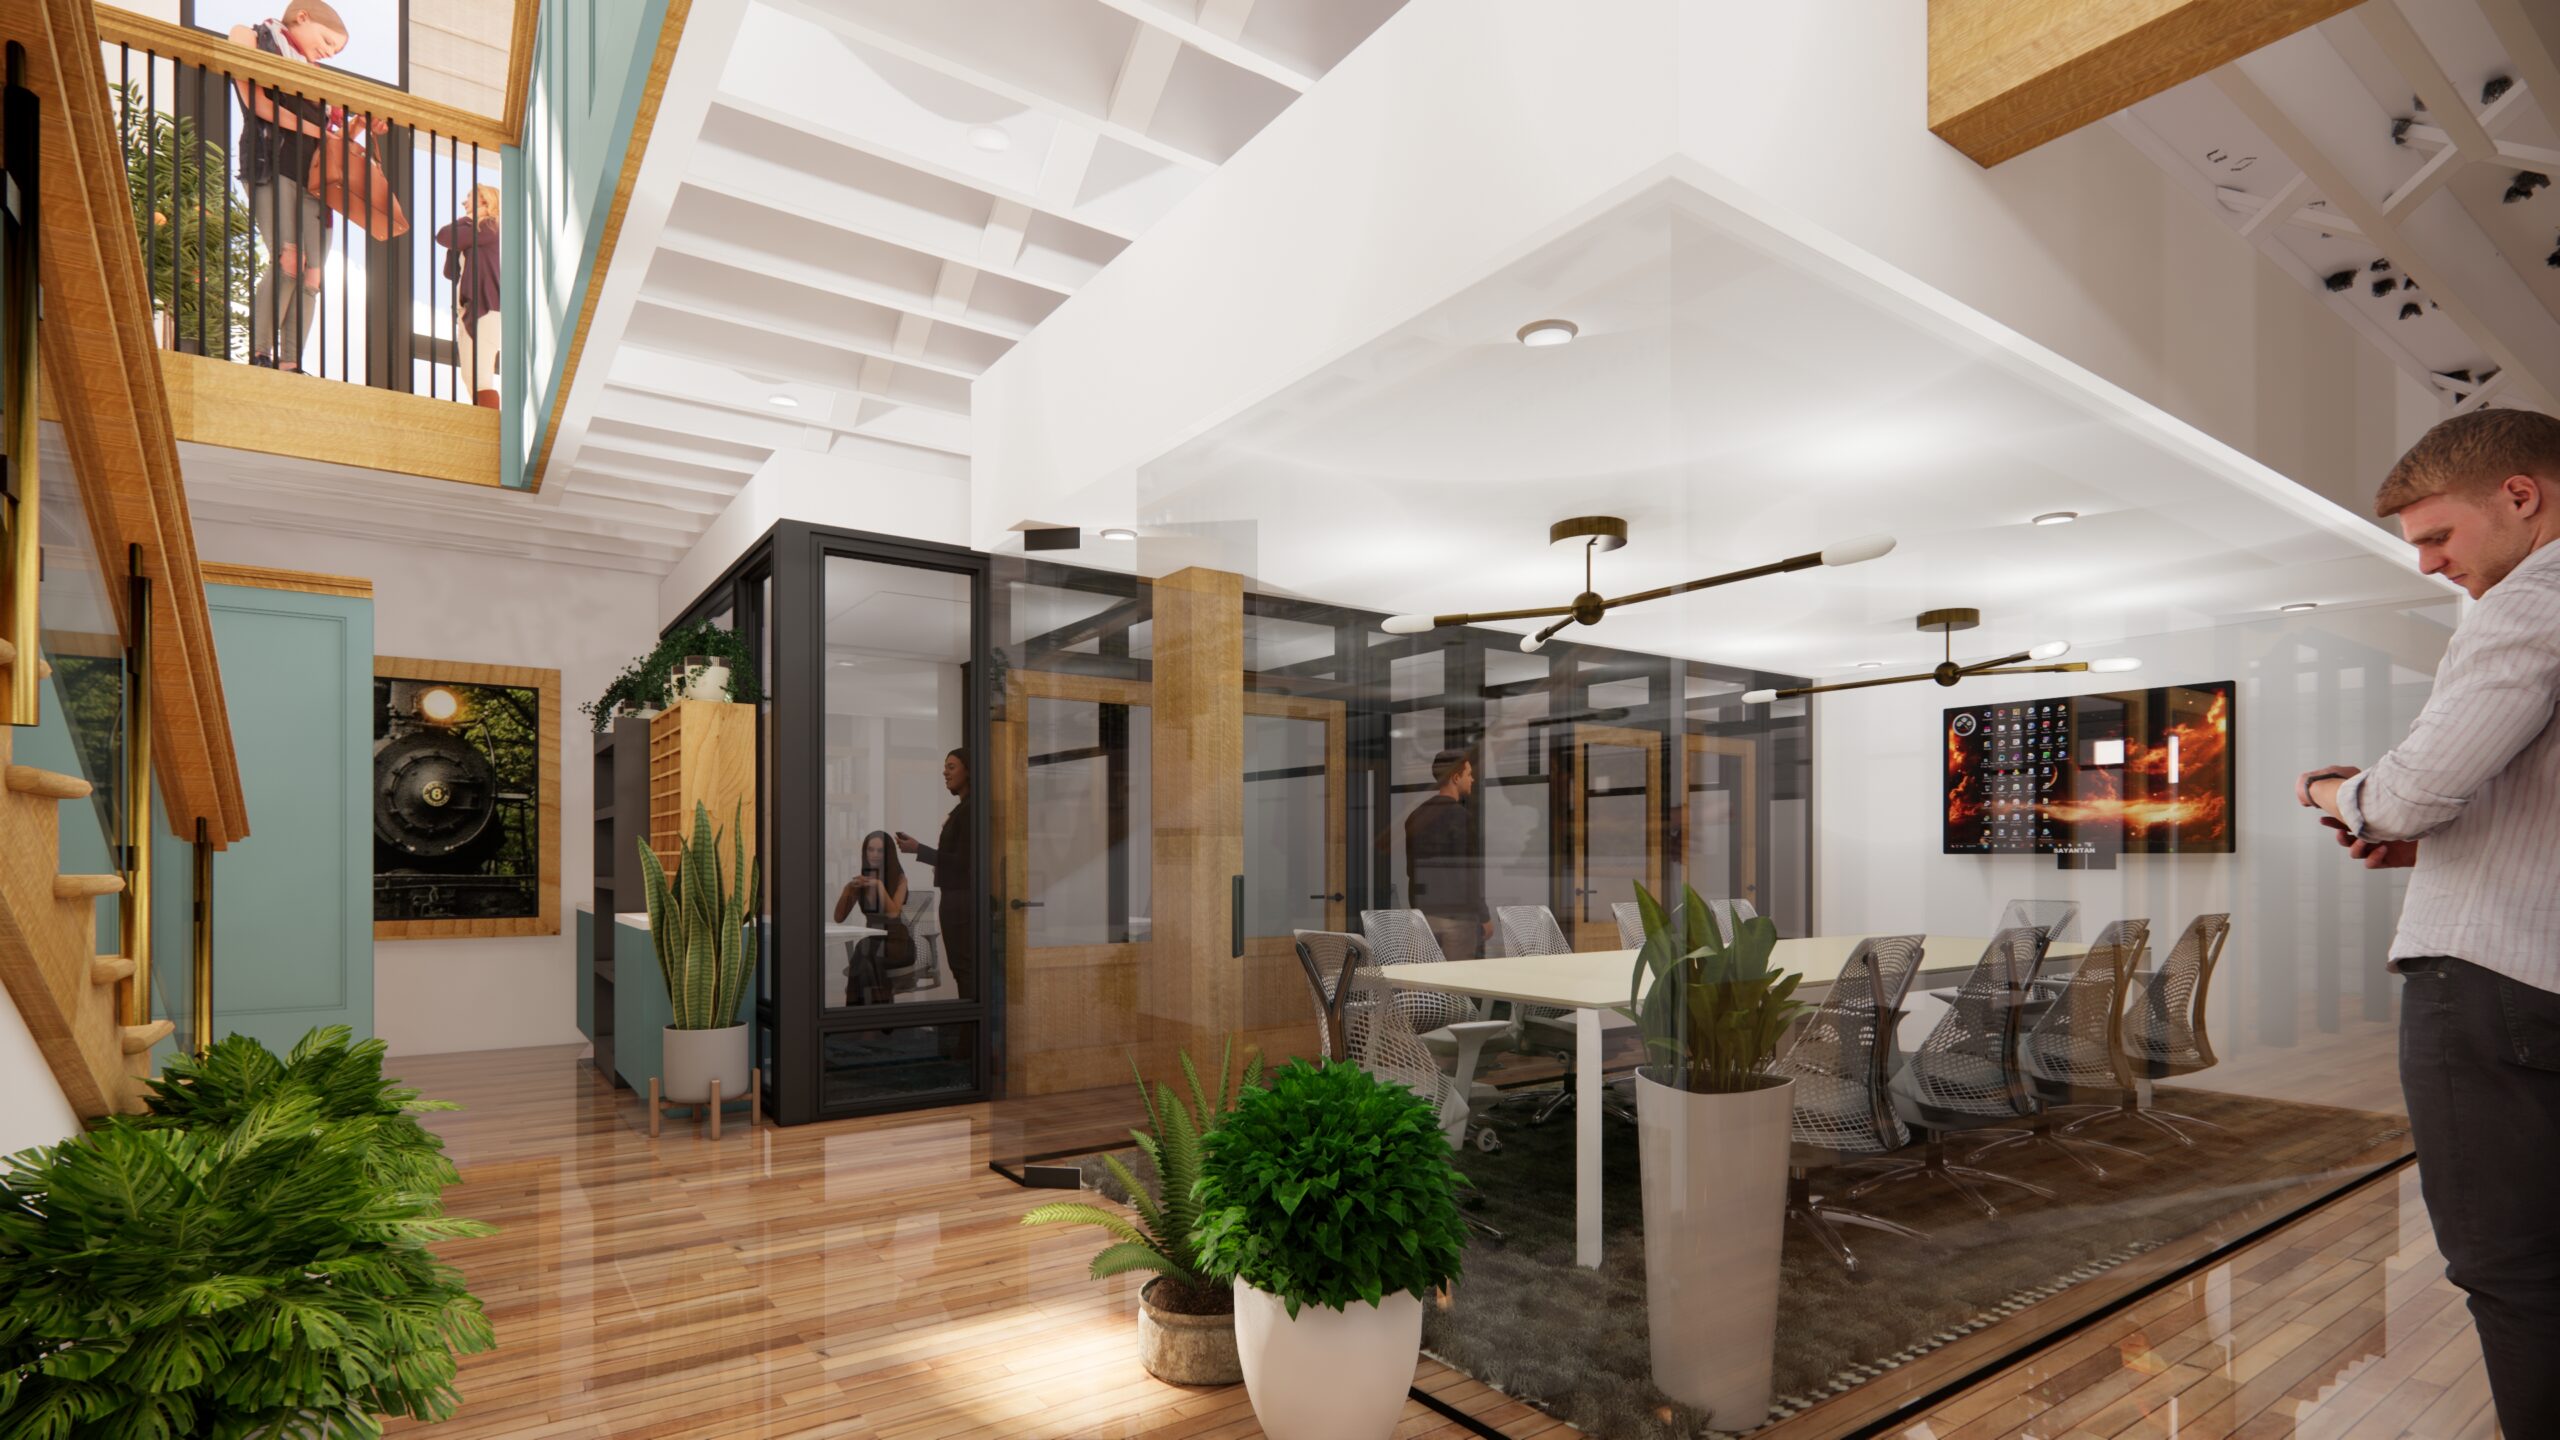 roanoke coworking space rendering lower level concept